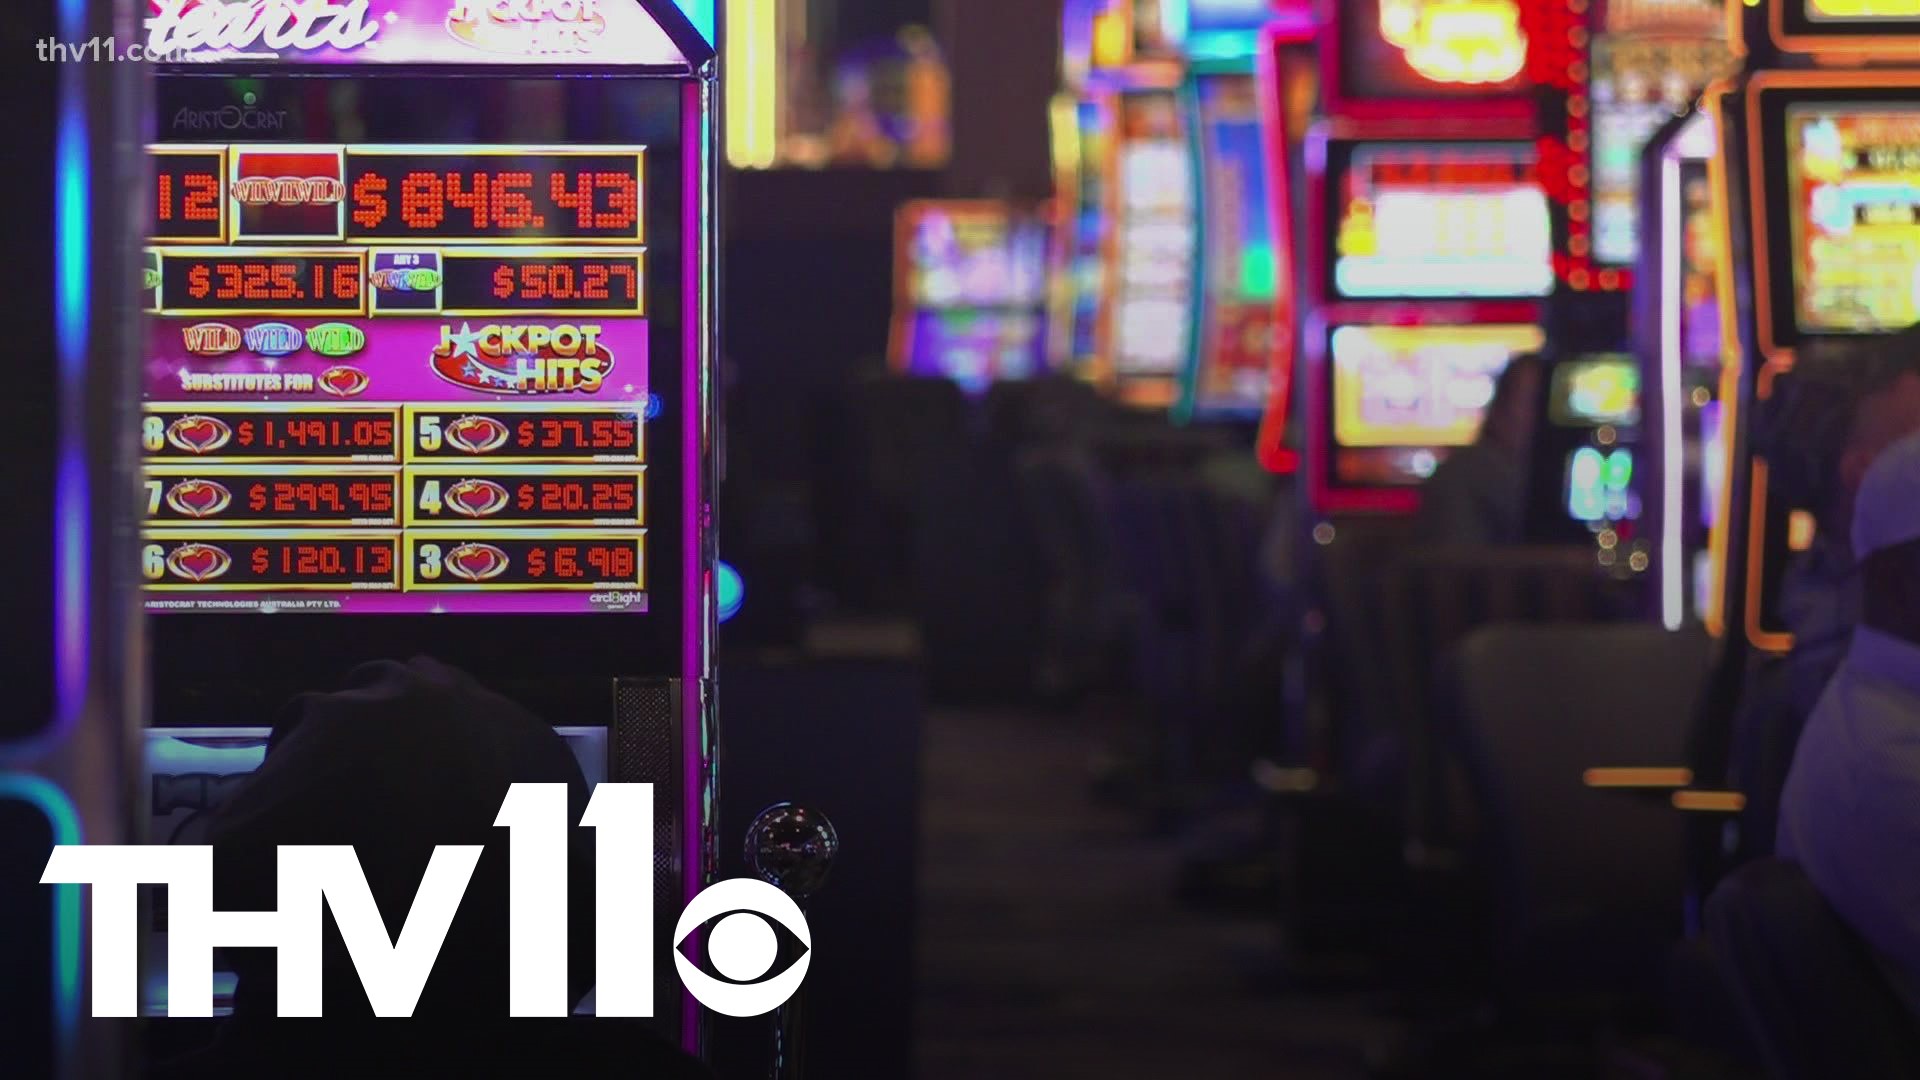 Sport betting has been allowed in Arkansas since 2019, but only at casinos. However, that could change soon as you may be able to start using your mobile phone.